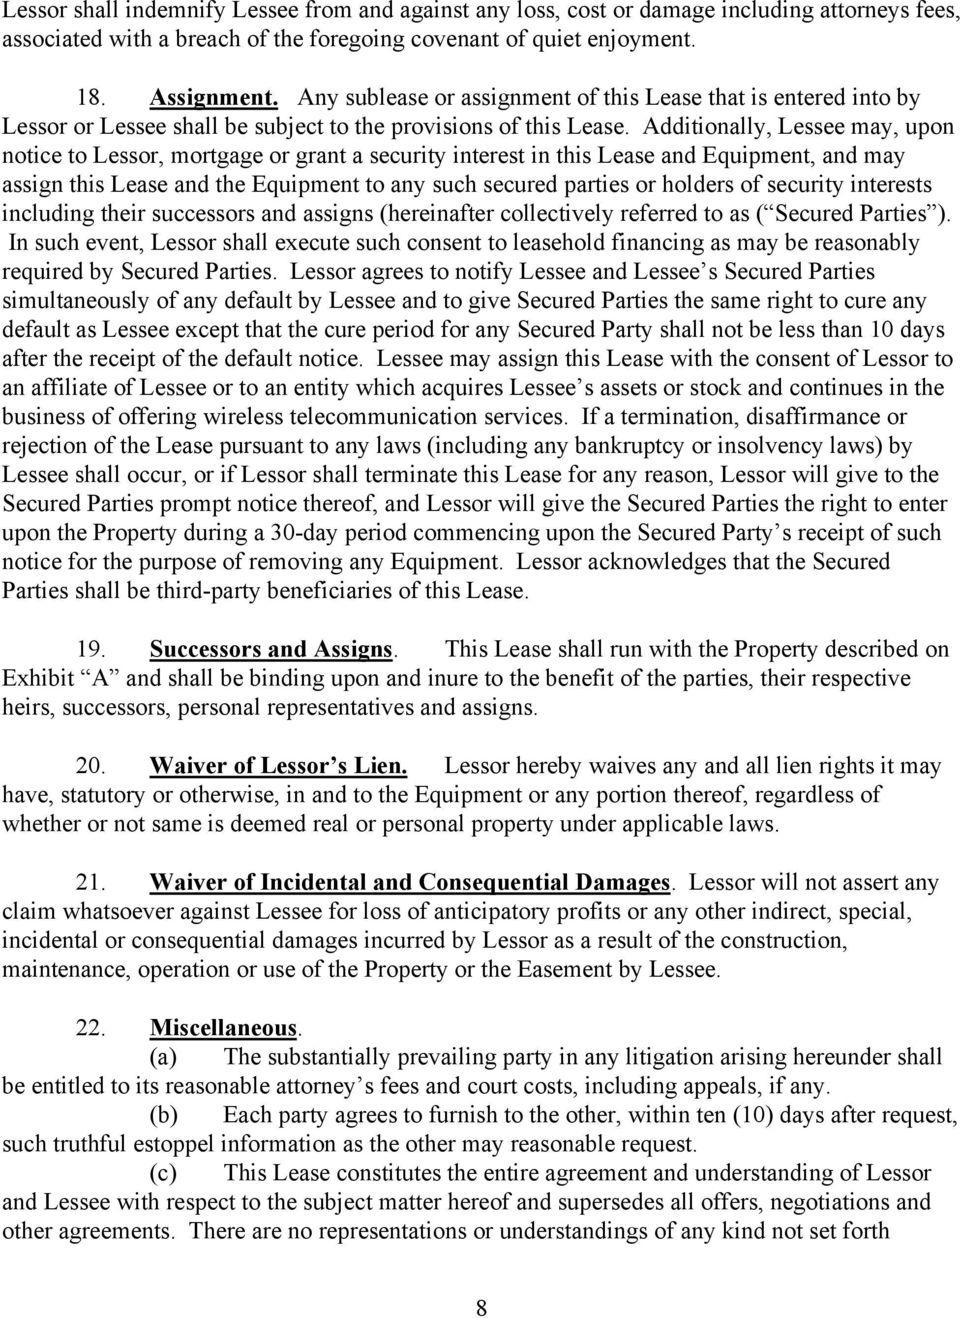 Additionally, Lessee may, upon notice to Lessor, mortgage or grant a security interest in this Lease and Equipment, and may assign this Lease and the Equipment to any such secured parties or holders